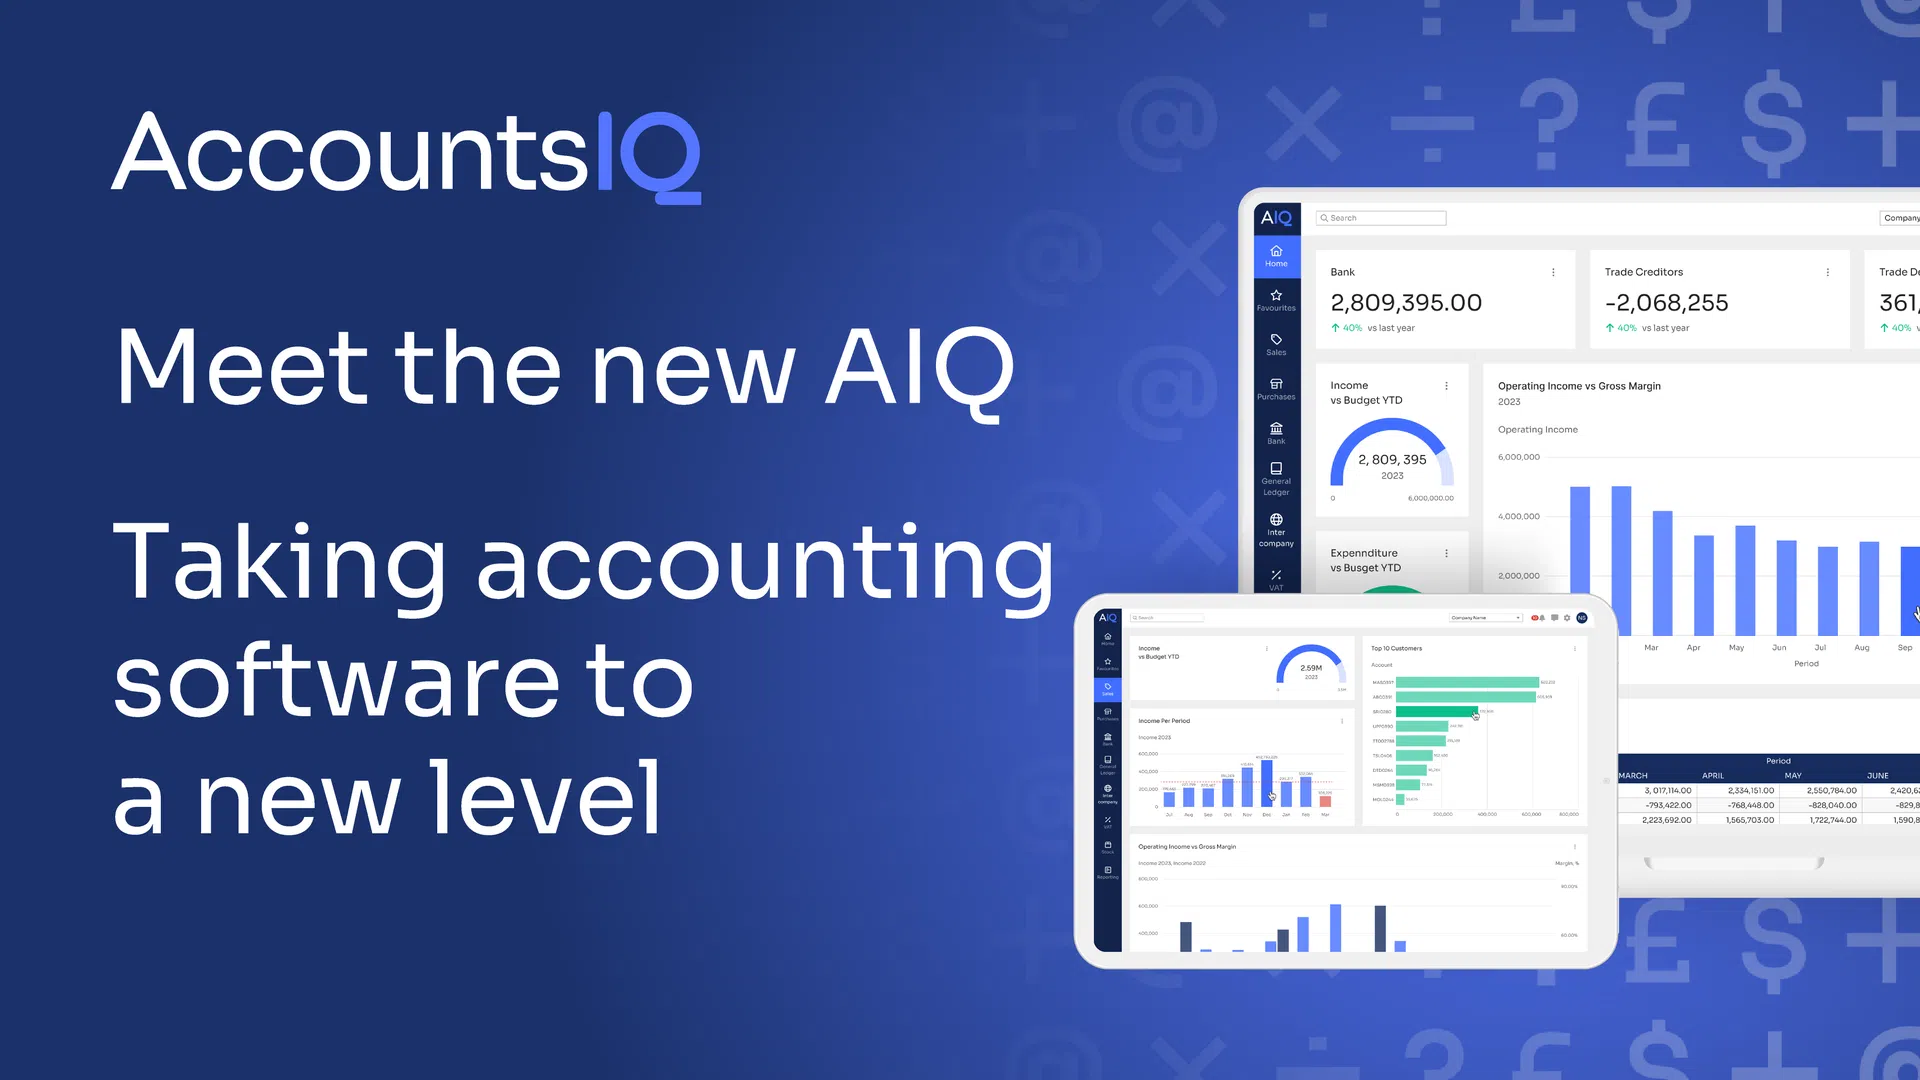 Coming soon: our makeover is almost complete from AccountsIQ logo